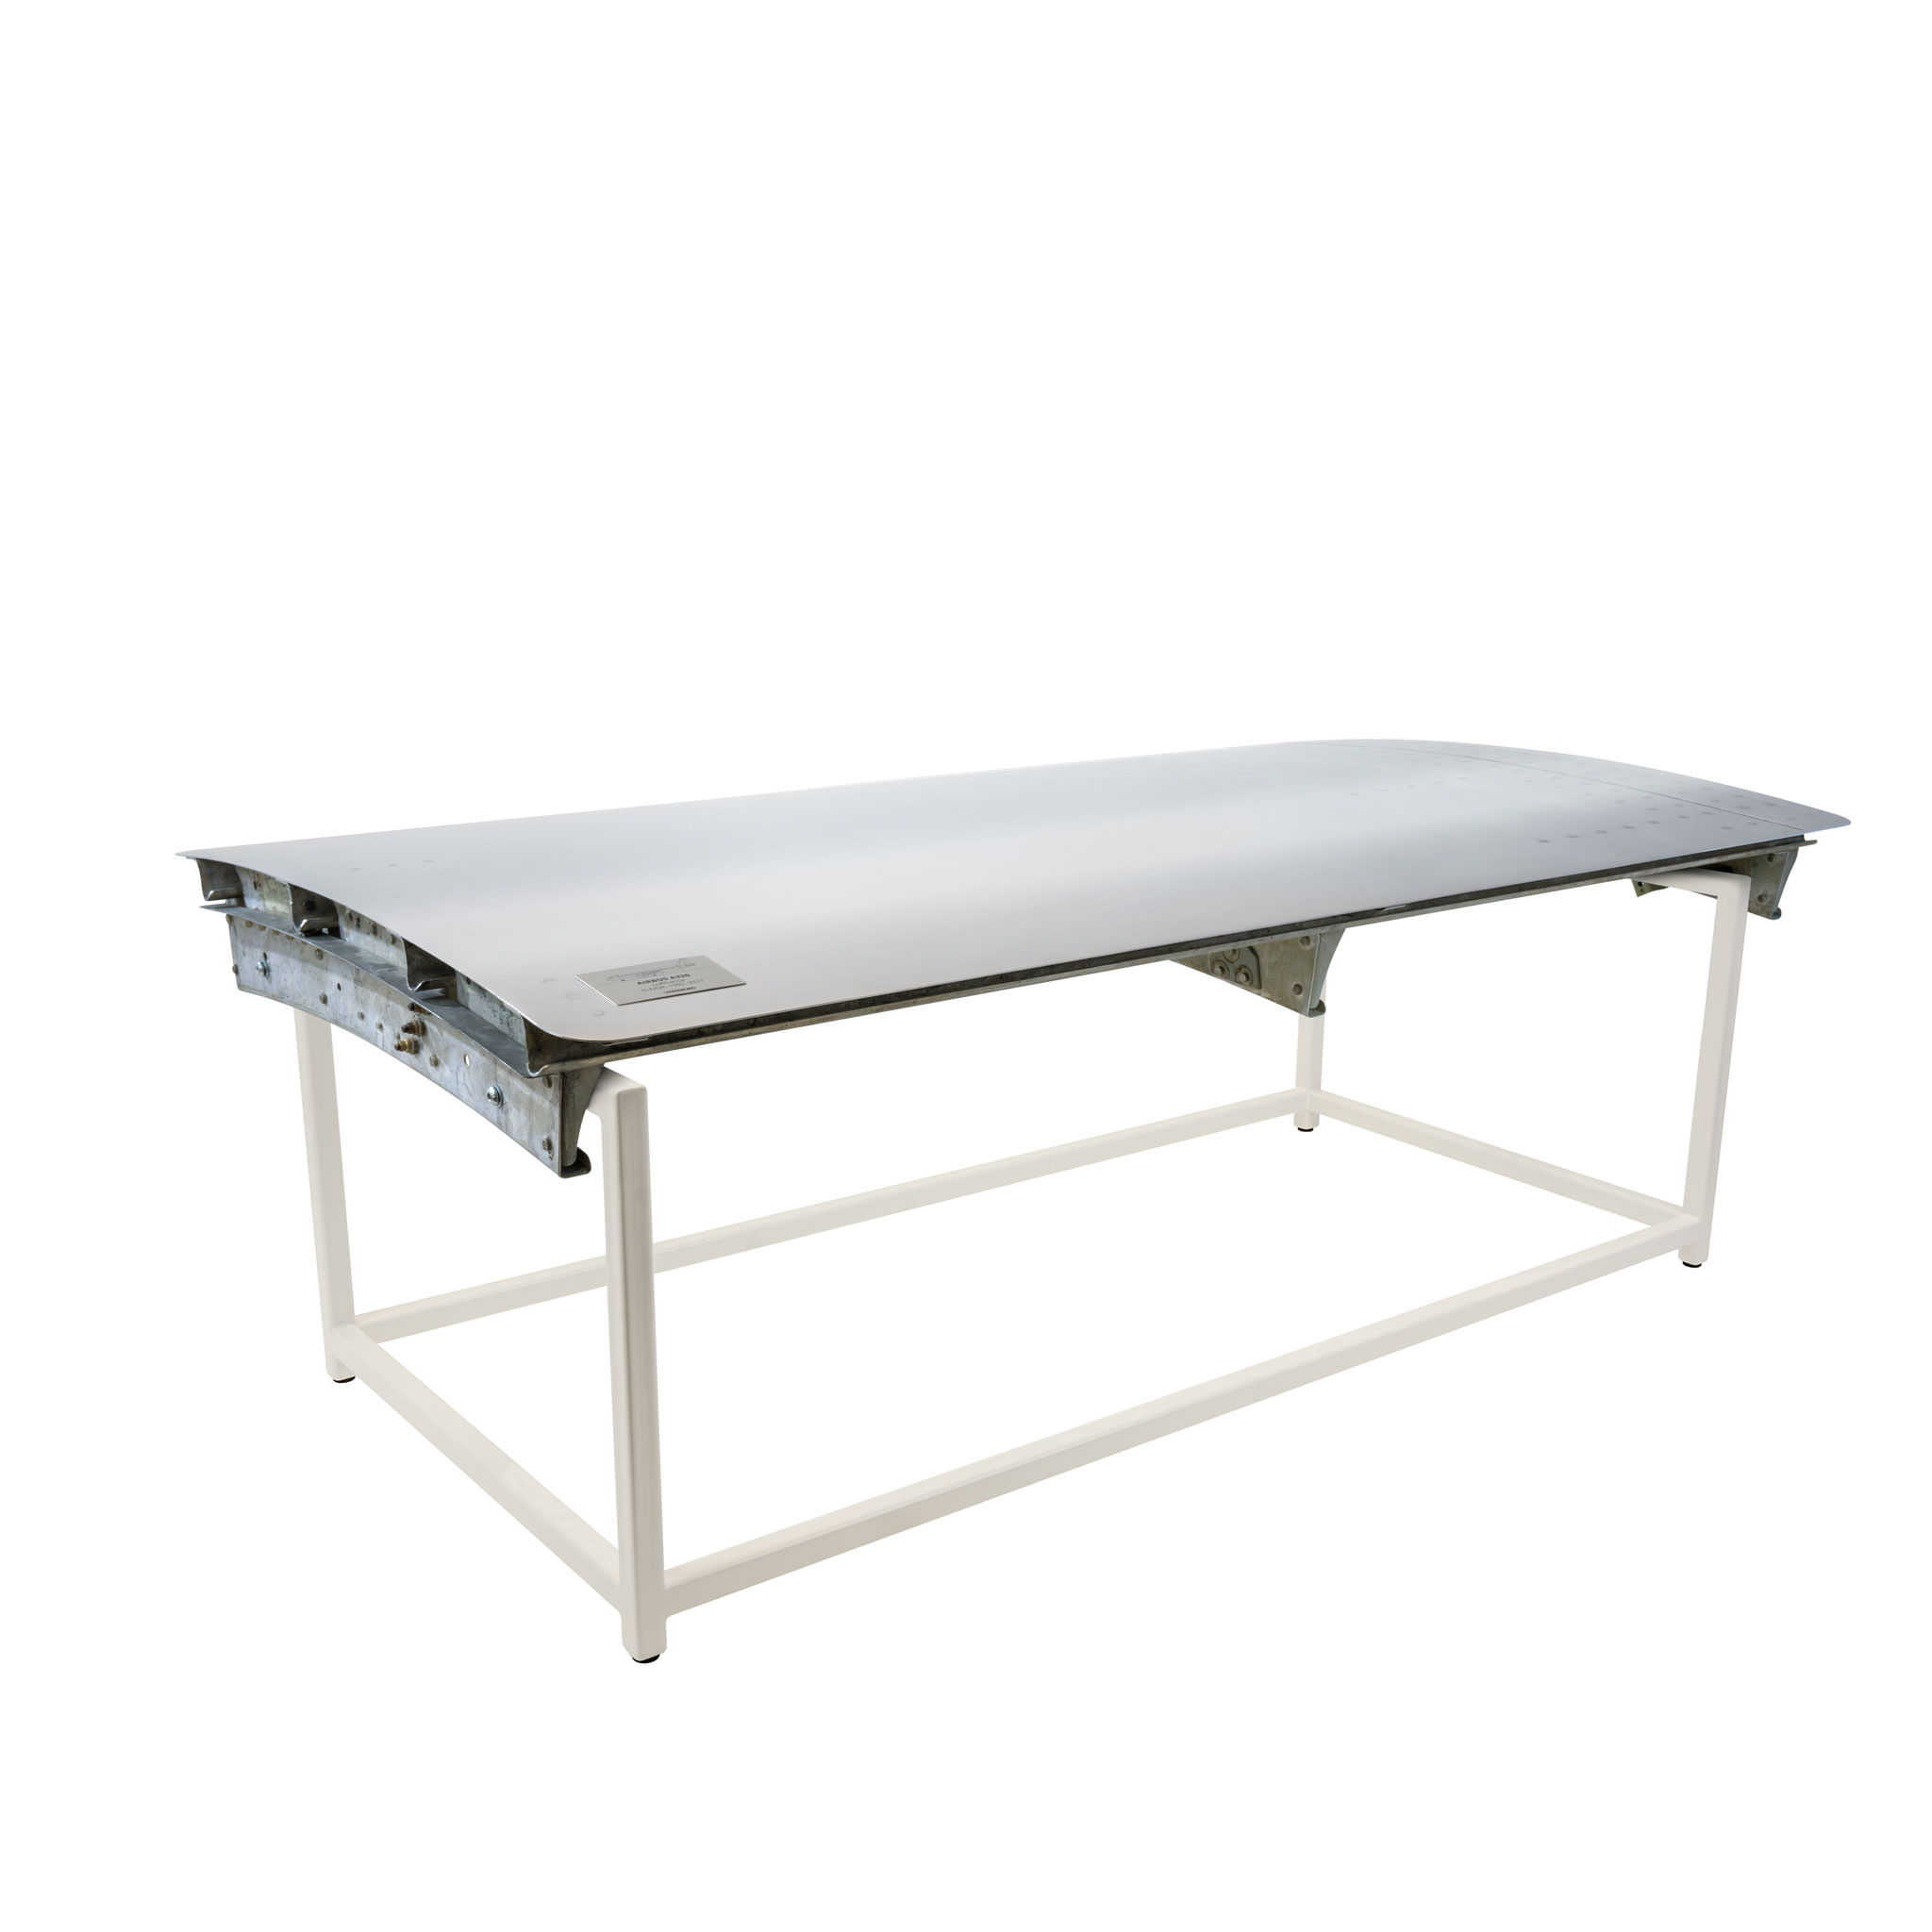 Coffee Table from Aircraft Parts, High-Gloss Polished, Frame: White, approx. 116 x 59 cm